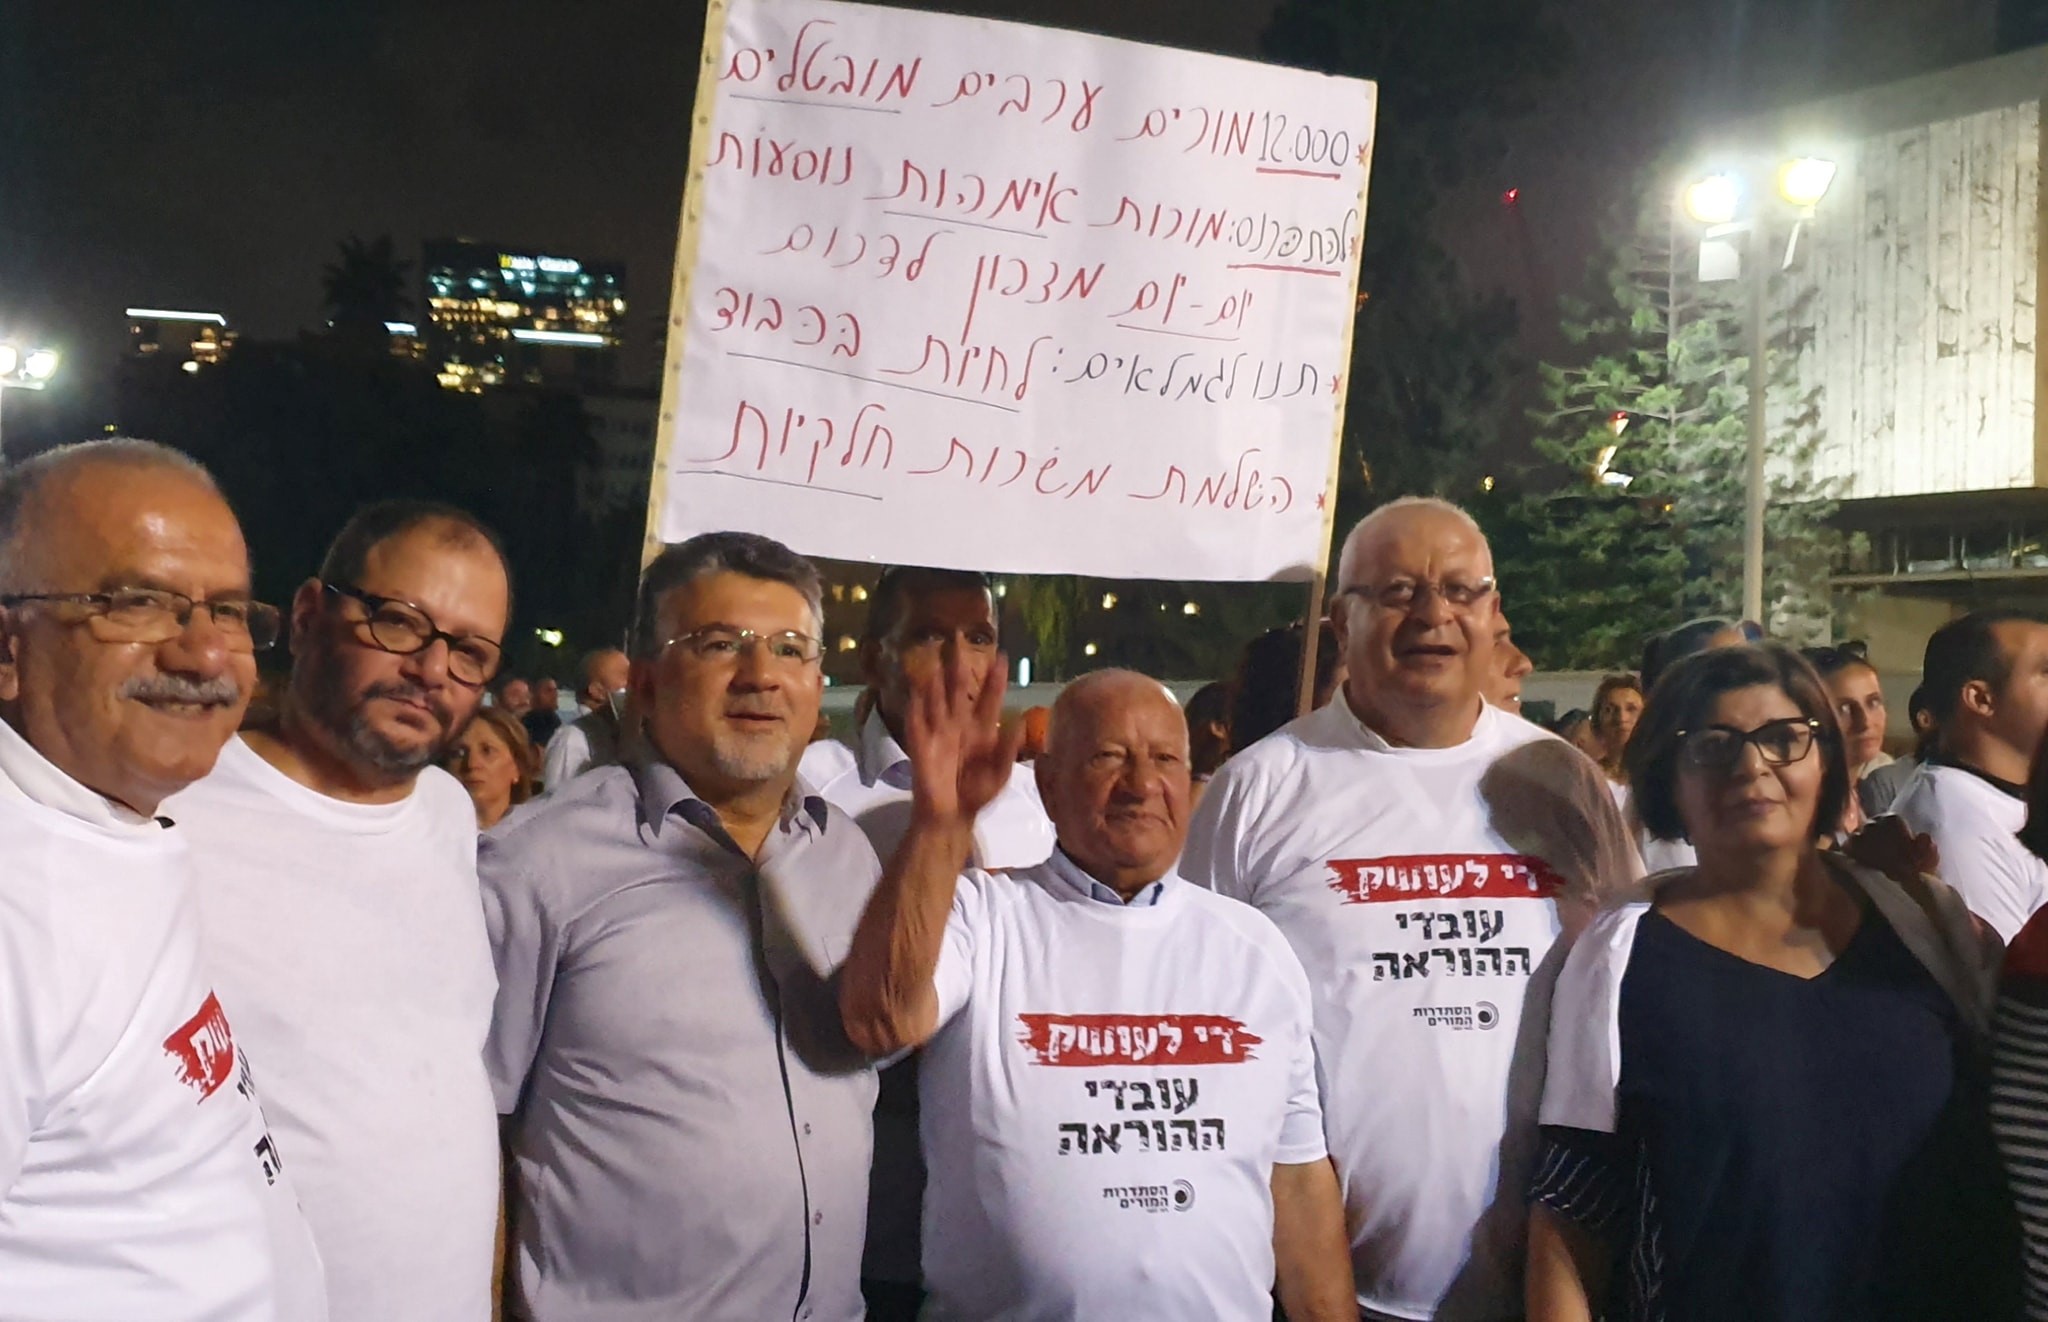 Hadash MKs Ofer Cassif and Youssef Jabareen (second and third from left) and Teacher's Union activists from Hadash during the demonstration held in Tel Aviv, last Thursday night, August 29; the sign reads: "*12,000 unemployed Arab teachers; *To earn a living, teachers who are mothers travel daily from the north to the south; *Let pensioners live with honor; *Make part-time jobs full-time."